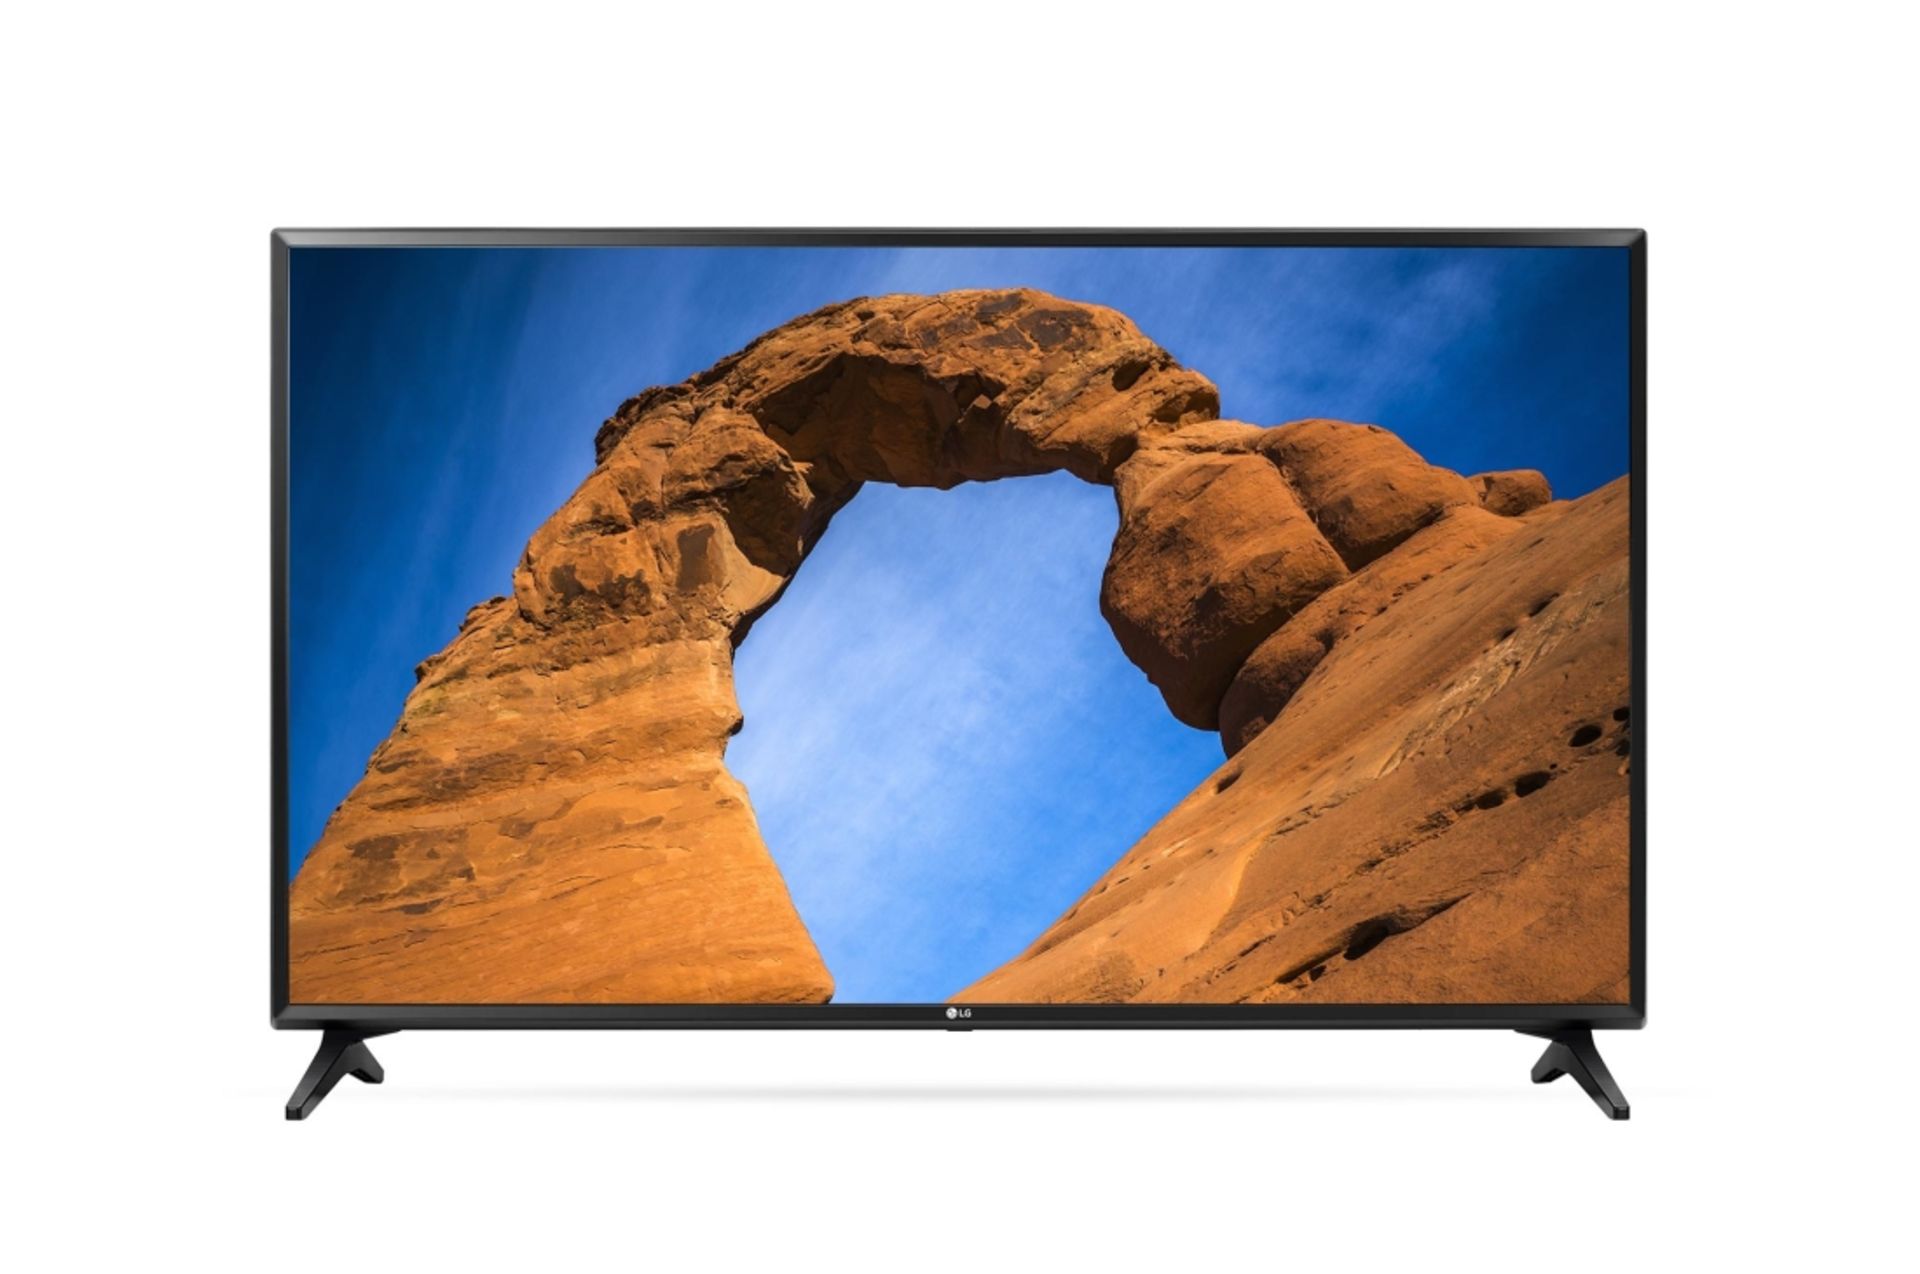 V Grade A LG 49 inch FULL HD LED SMART TV WITH FREEVIEW HD & WEBOS 3.5 & WIFI 49LK5900PLA